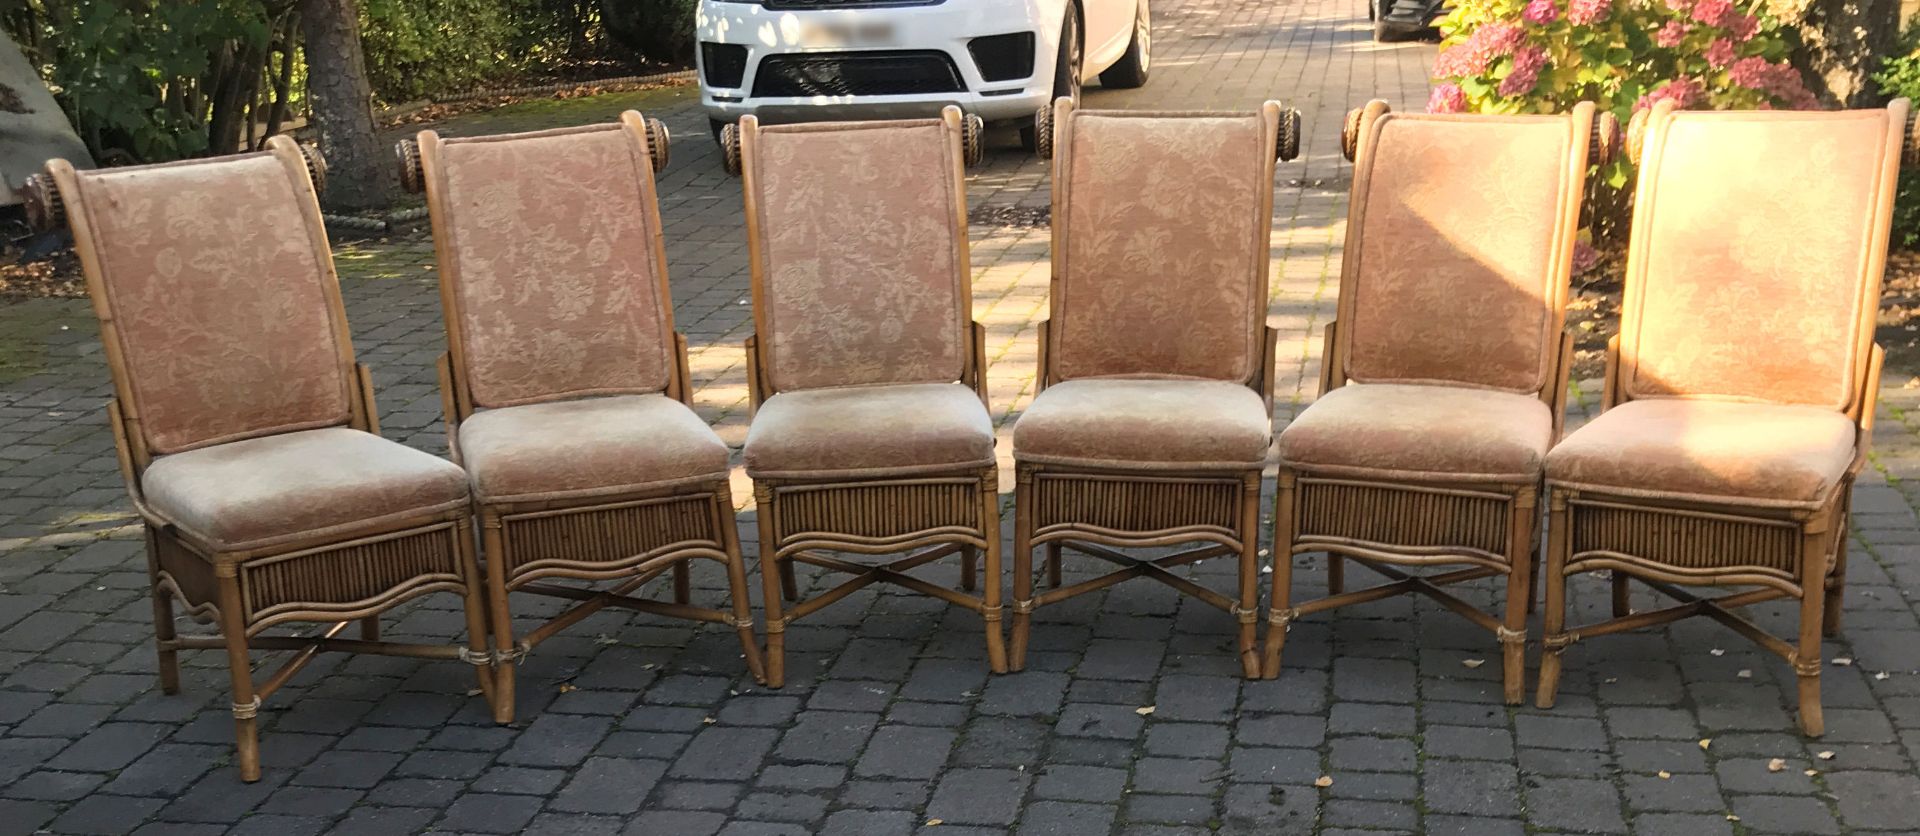 50 x Bamboo Chairs in Very Good Condition - CL535 - Location: Southport